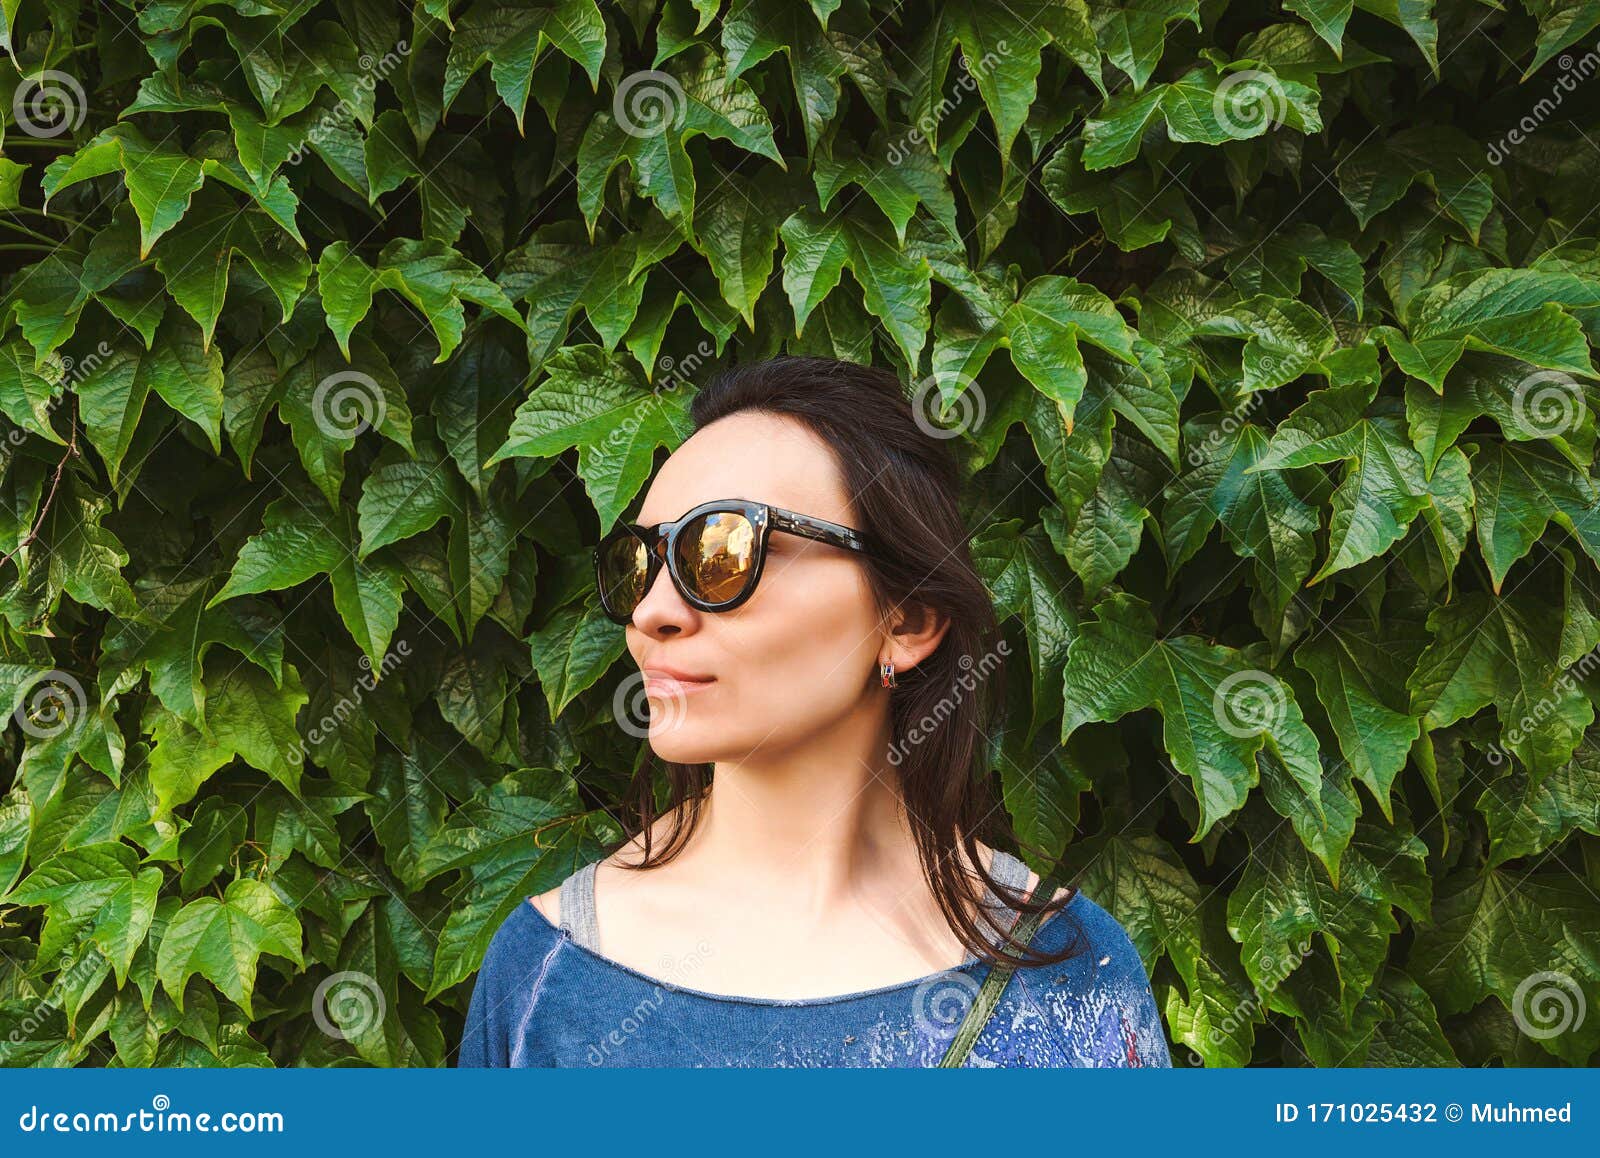 Natural Beauty. Young Sensual Woman in Green Leaves. Woman with No ...